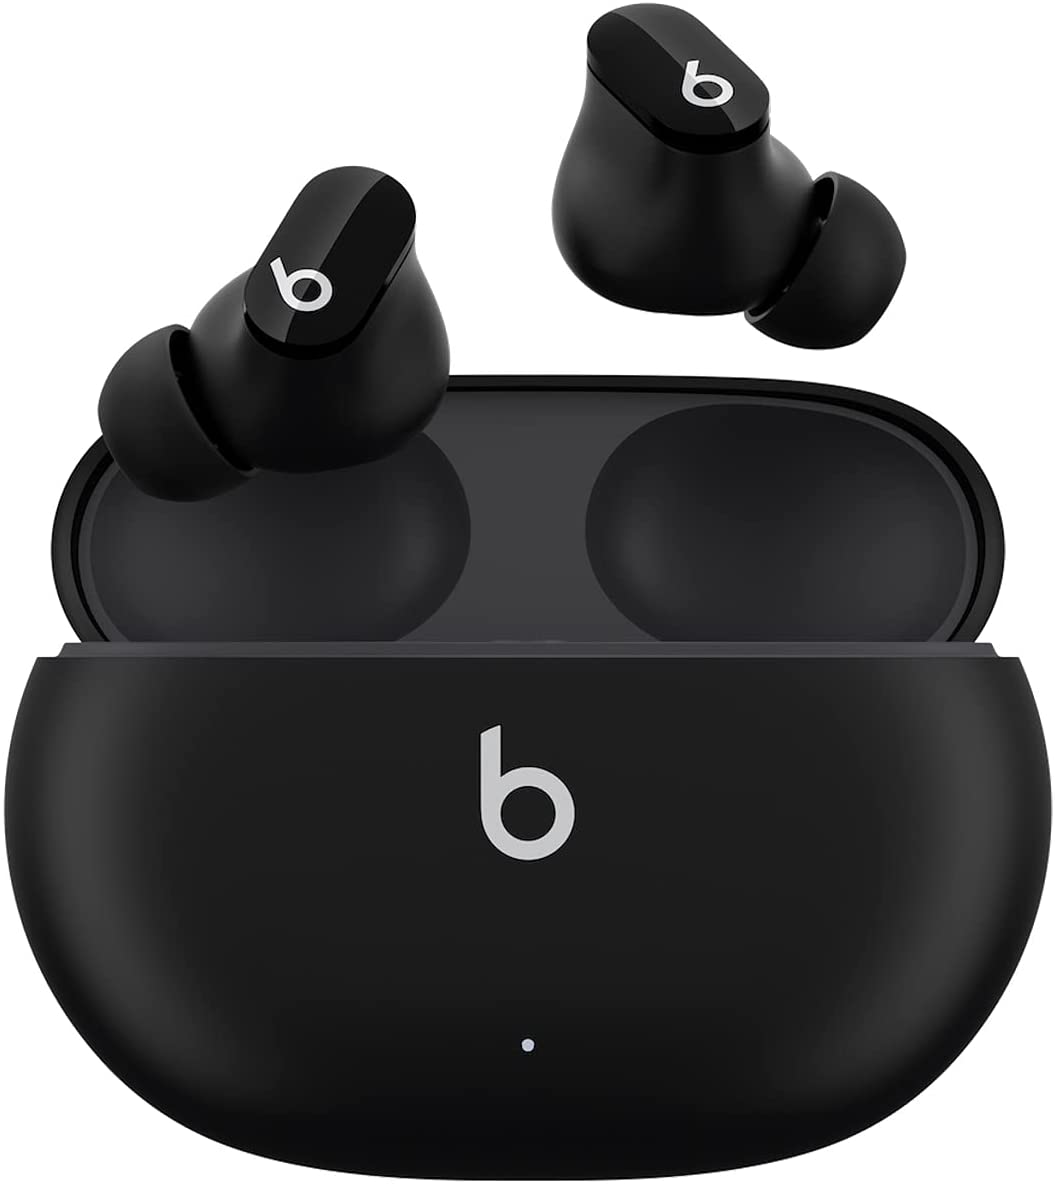 Apple launches Dr. Dre-inspired Beats Studio Buds with active noise